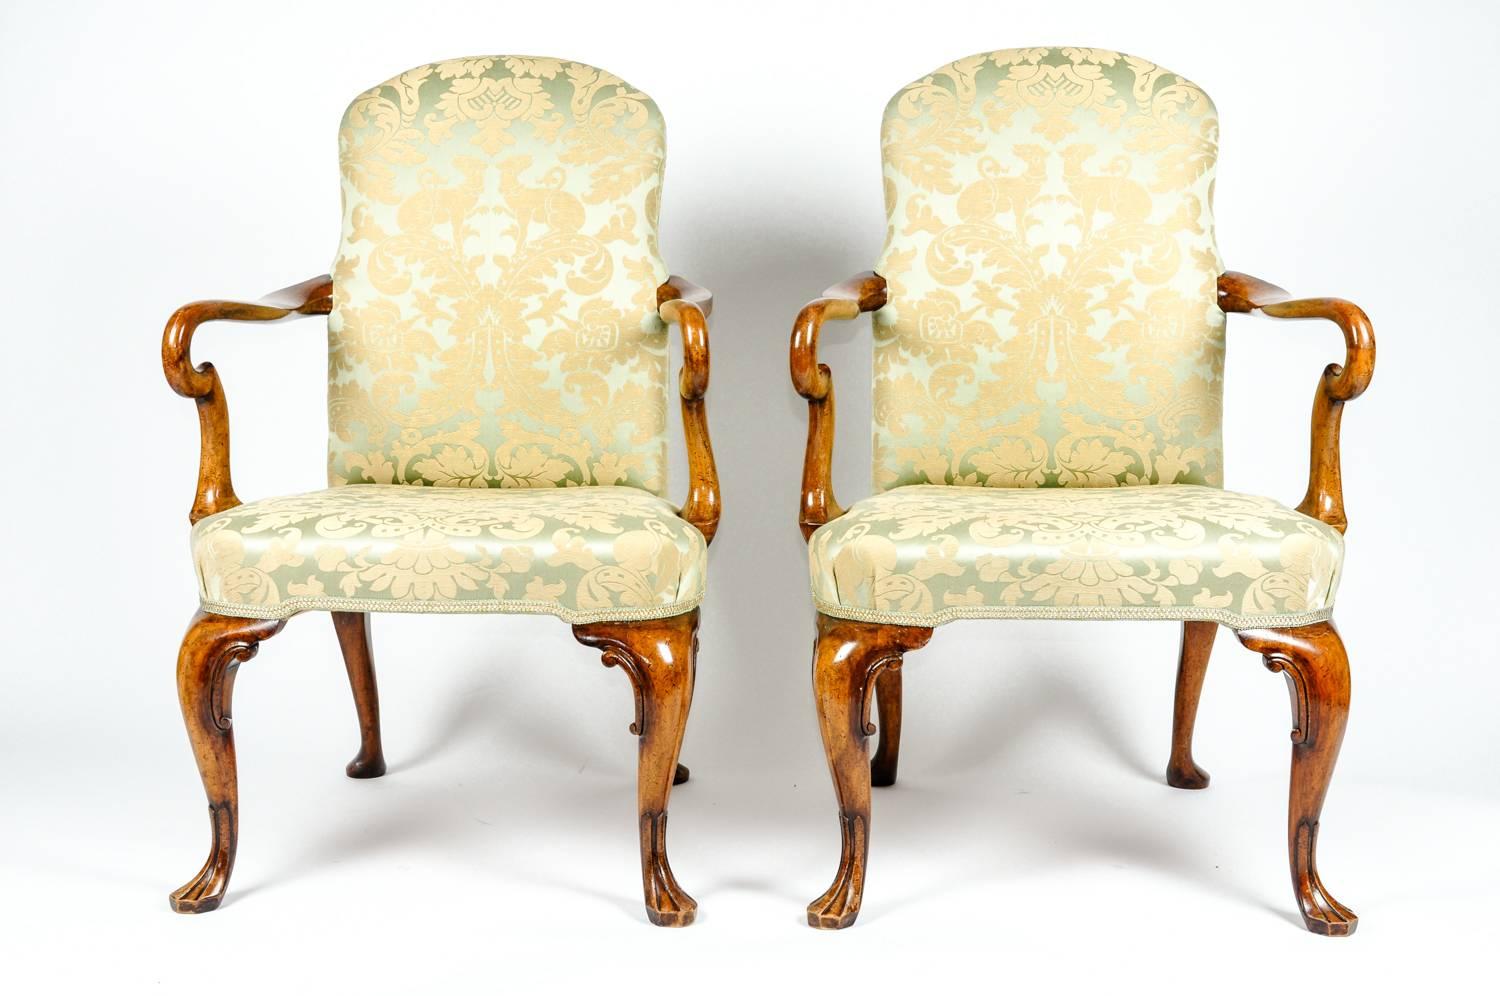 Antique pair of English side armchairs with green damask upholstery. Each armchair is in excellent condition, recently reupholstered. Each chair measure 38 inches high x 23 inches width x seat high 17 inches.